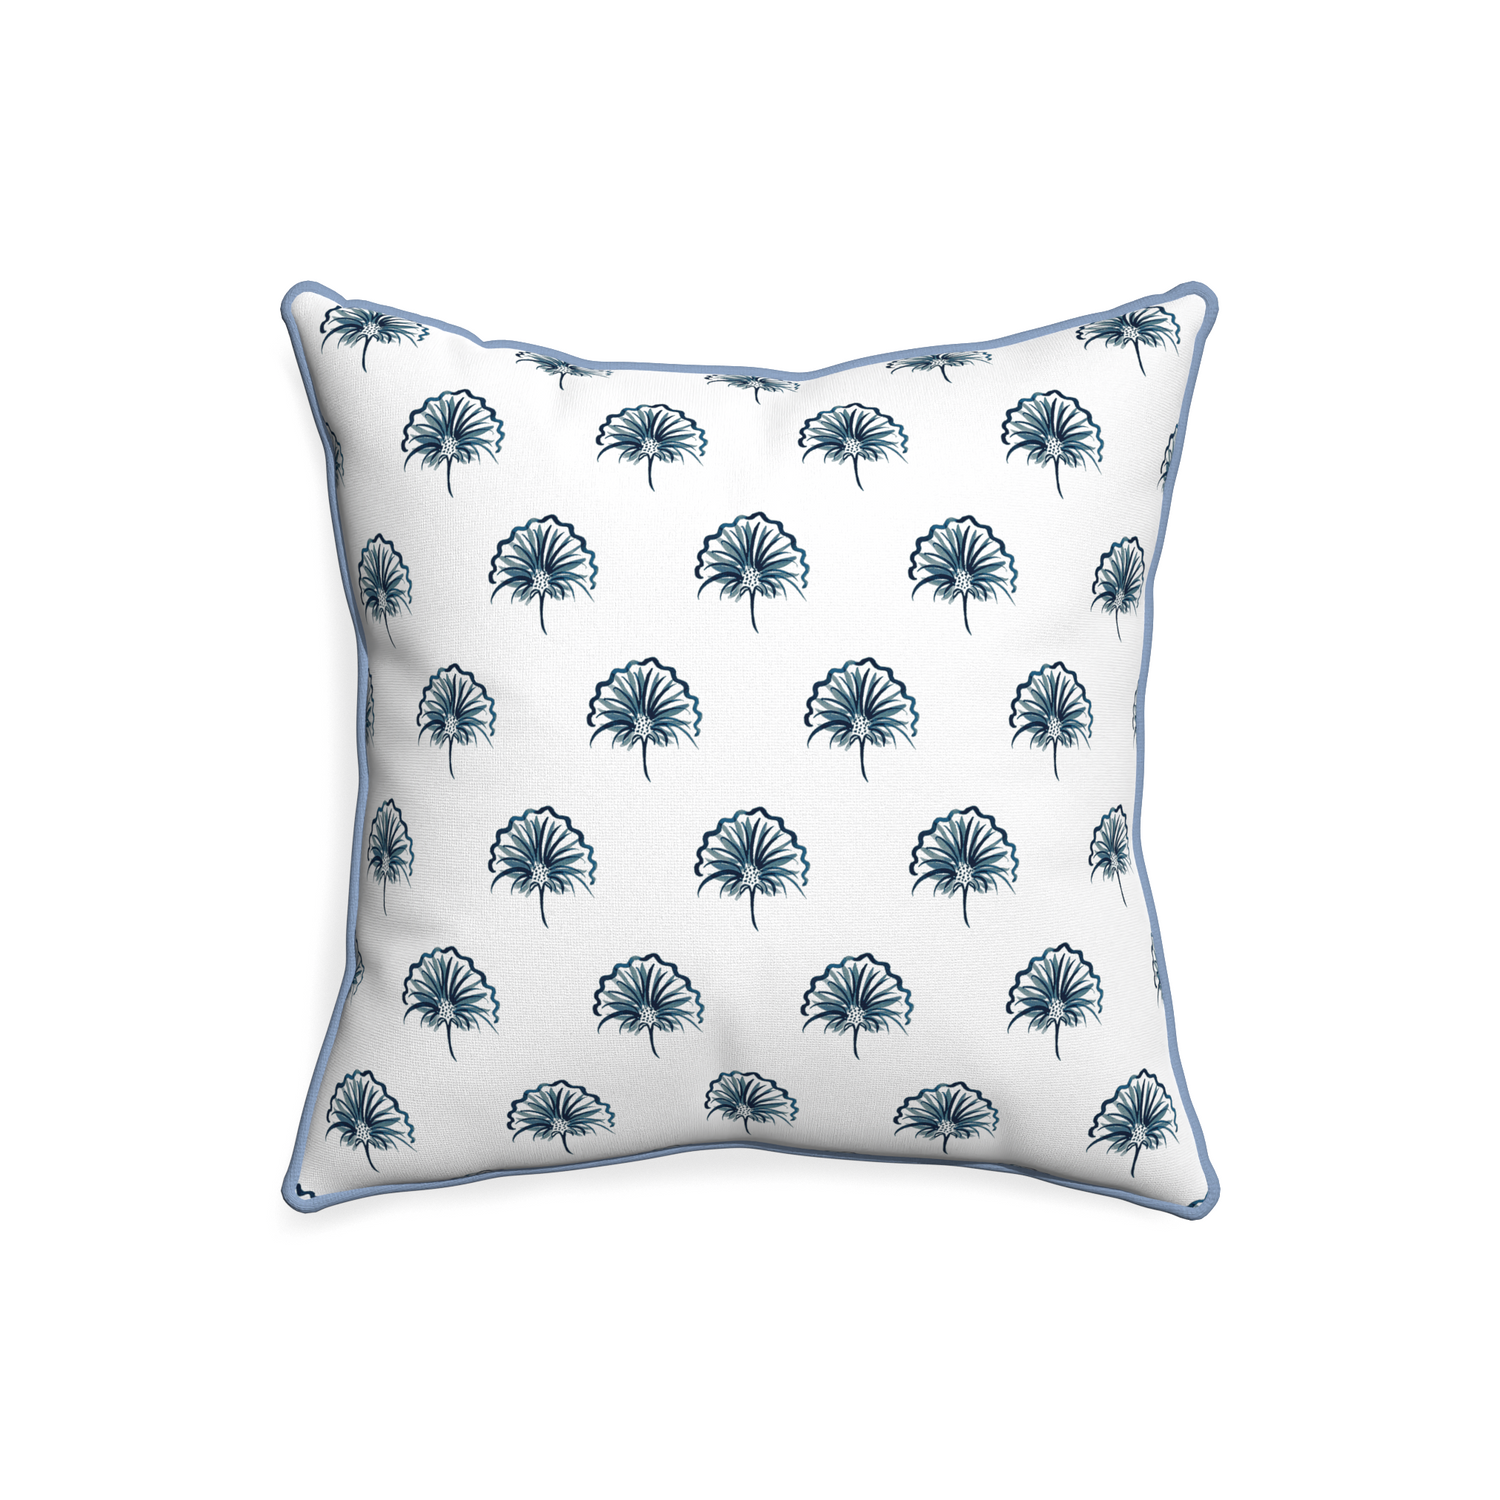 20-square penelope midnight custom floral navypillow with sky piping on white background